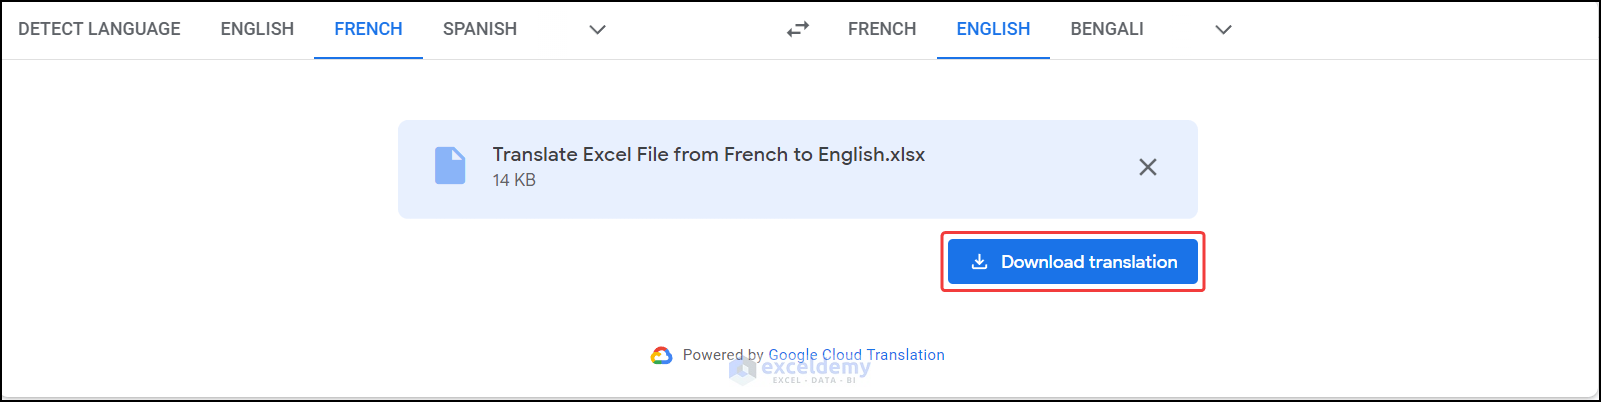 Download the translated Excel file